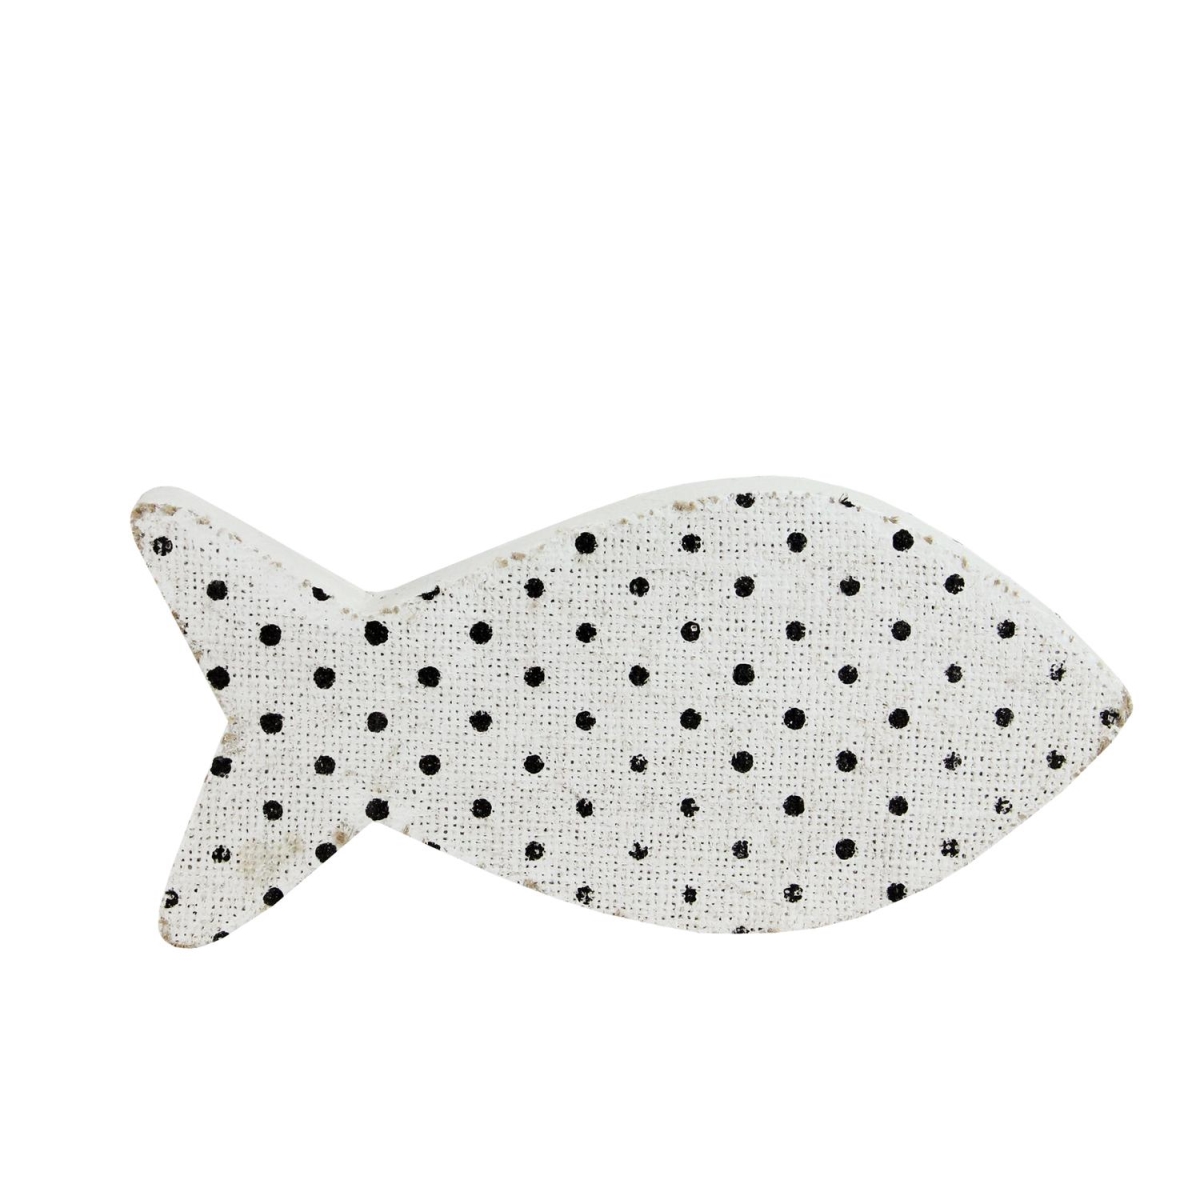 32735181 9.8 In. Cape Cod Inspired Table Top Polka Dot Fish Decoration, White & Black